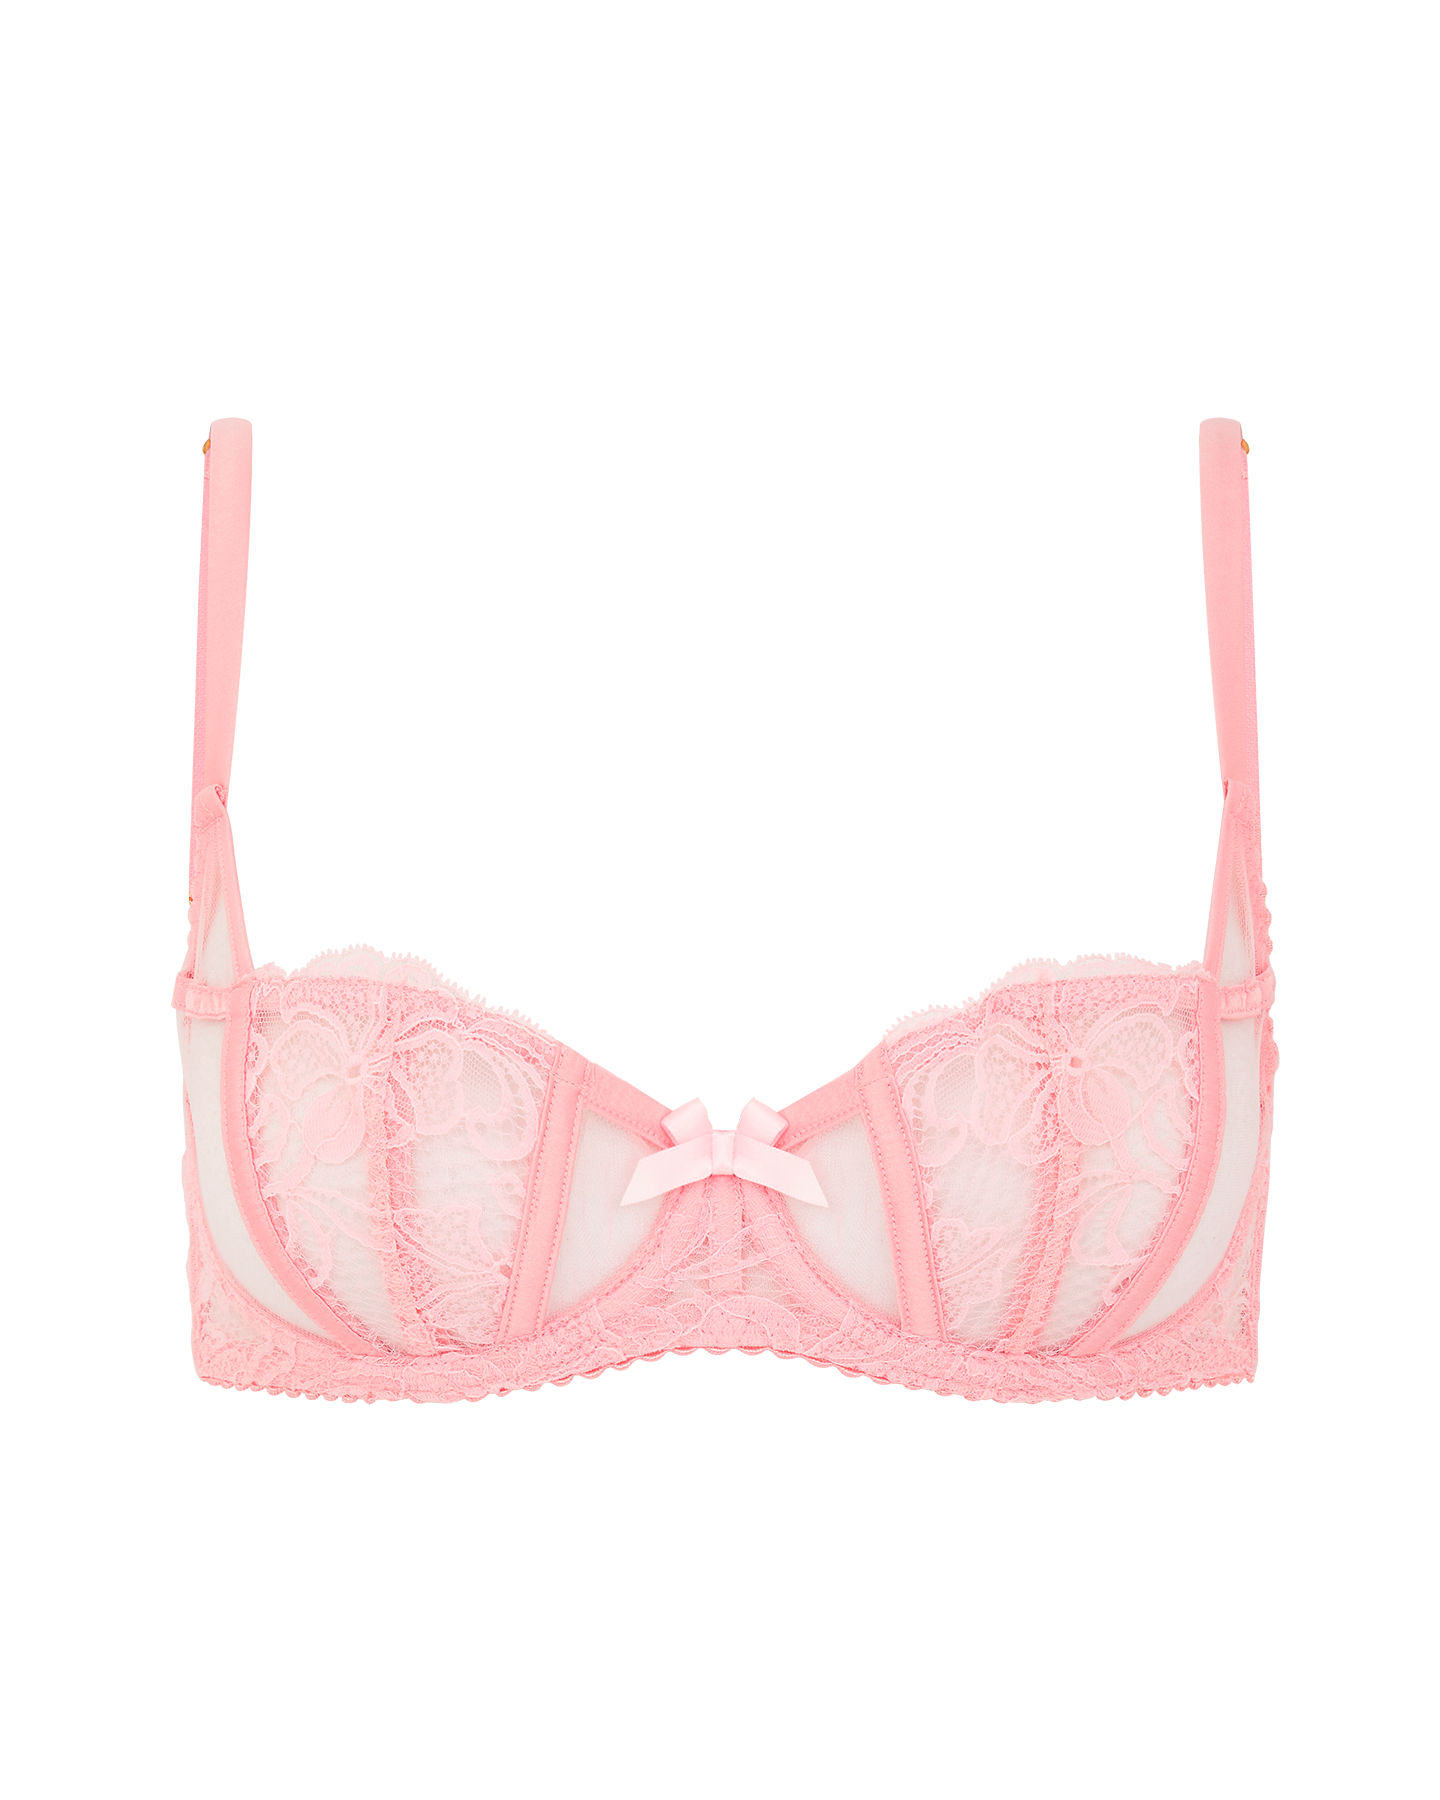 Agent Provocateur Rozlyn Lace-Inset Half-Cup Bra - Bergdorf Goodman